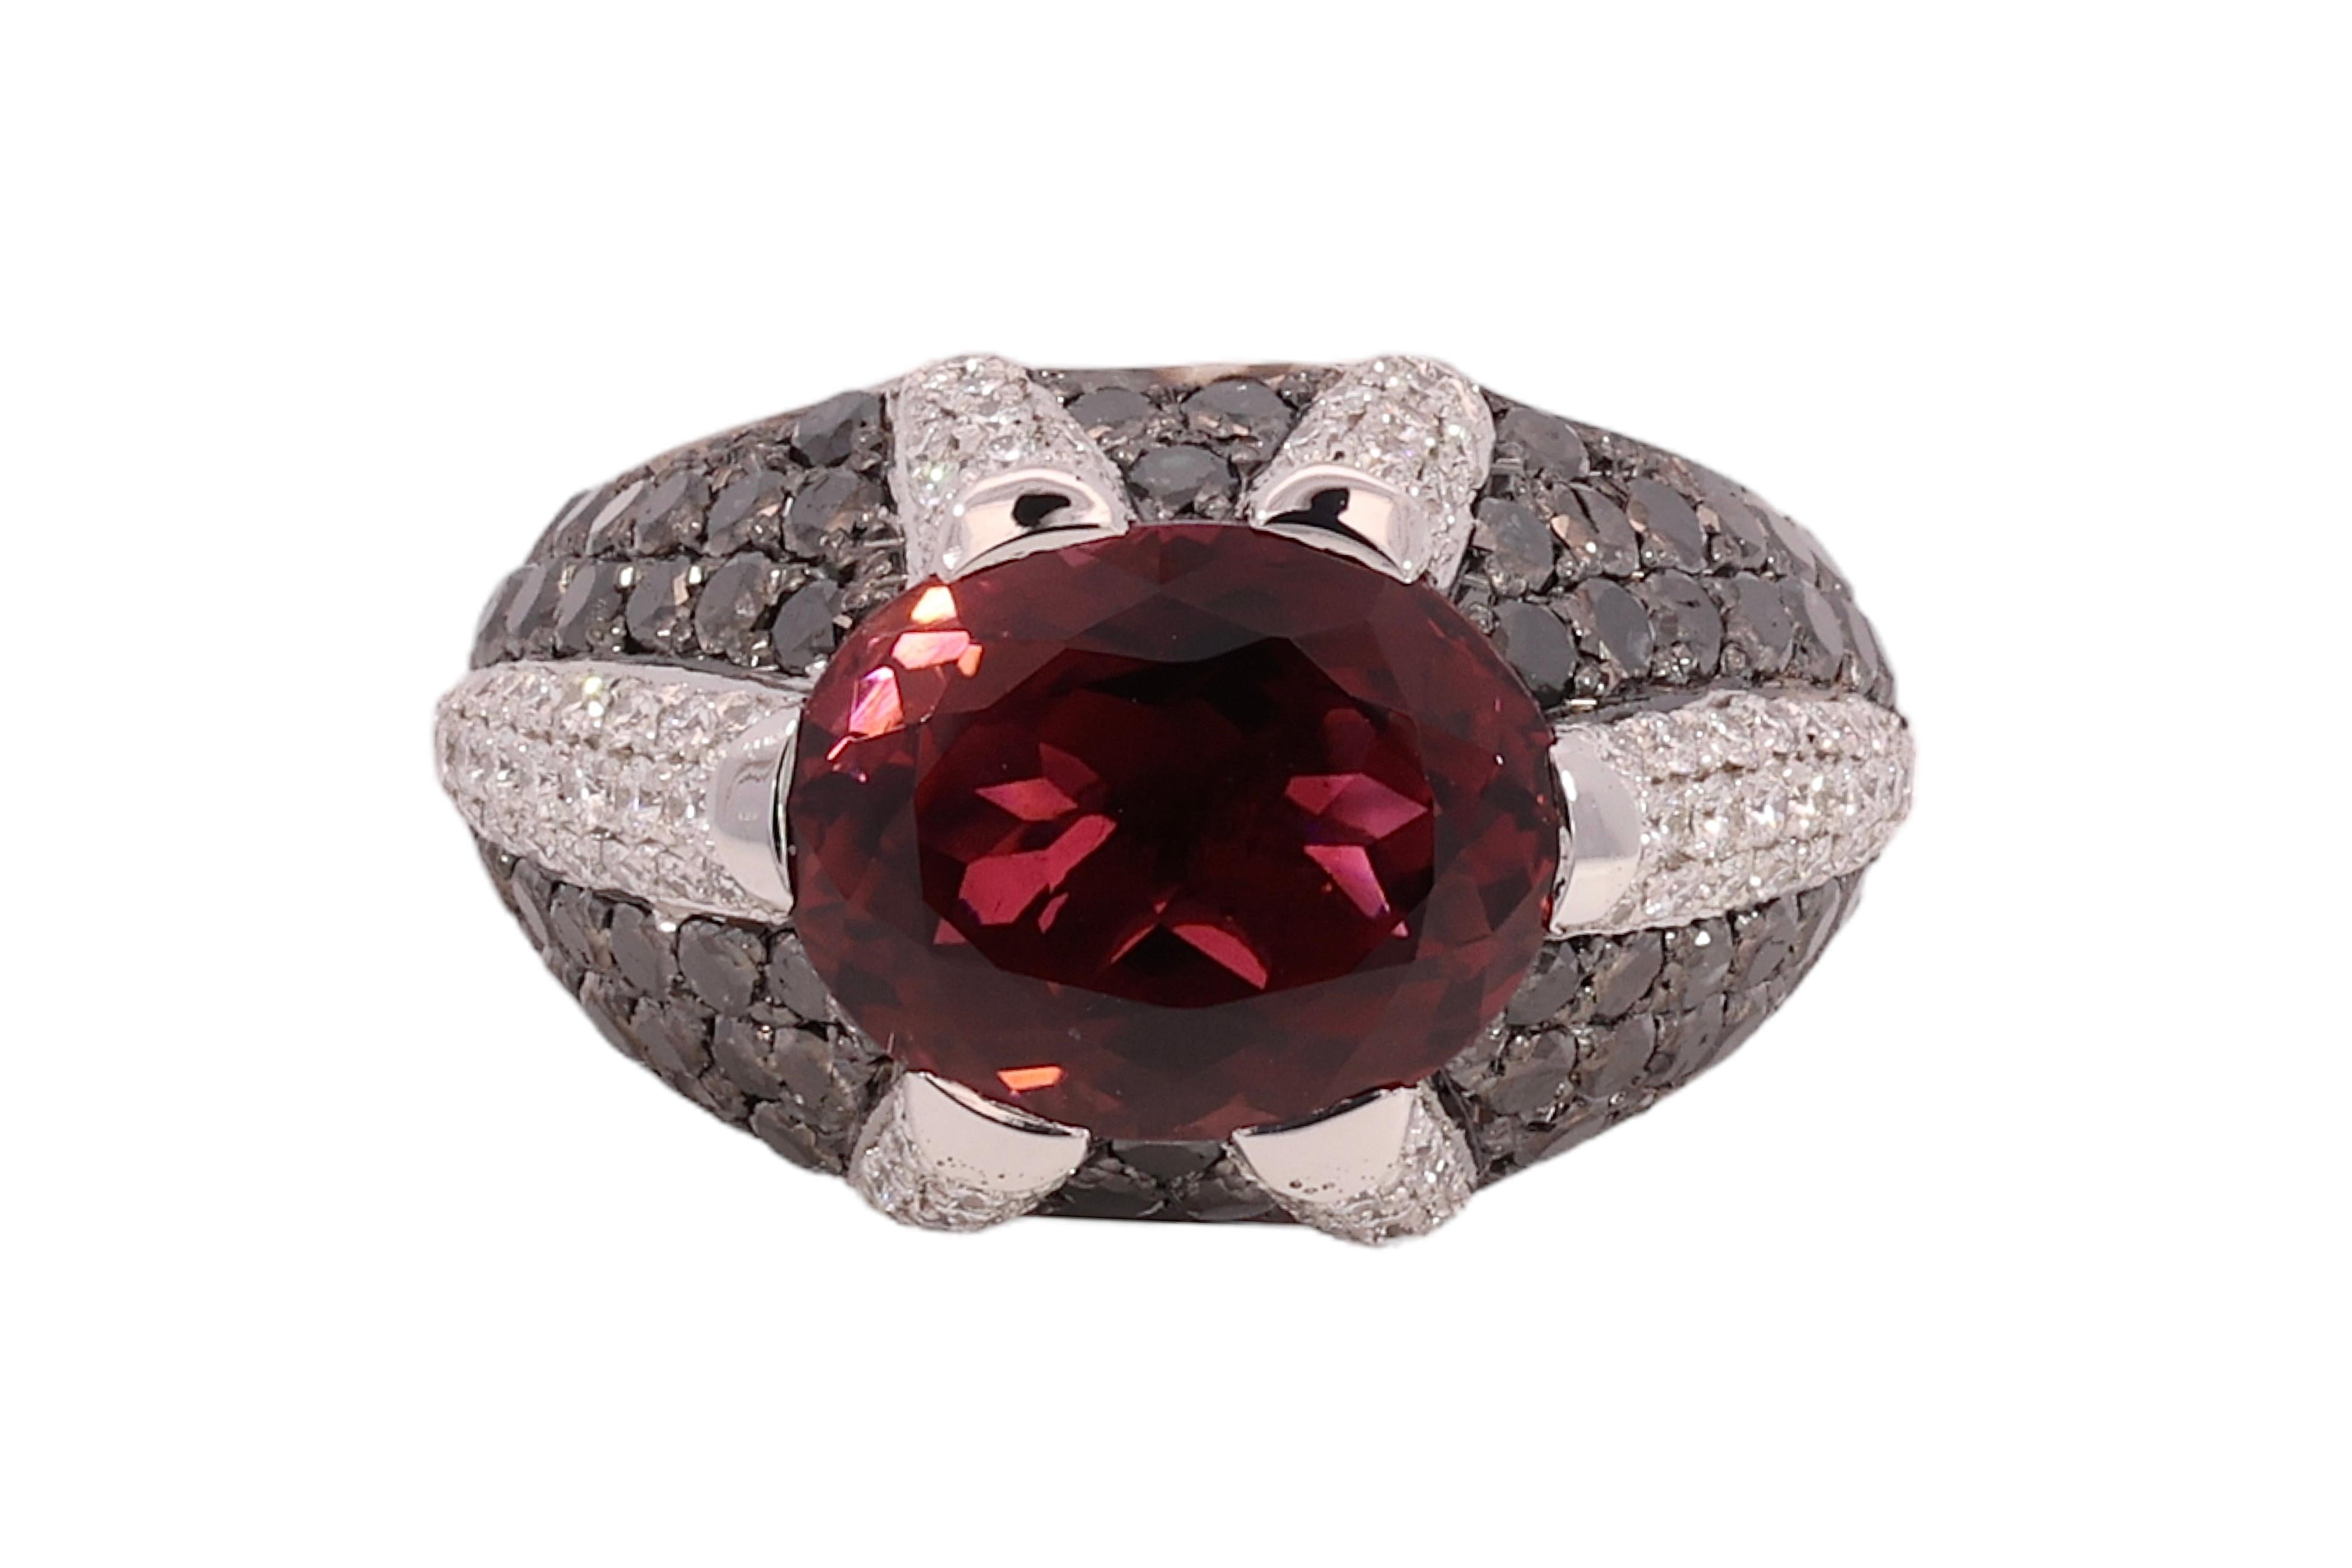 18kt White Gold Ring with 5.61ct Tourmaline and 2.75ct White and Black Diamonds For Sale 4